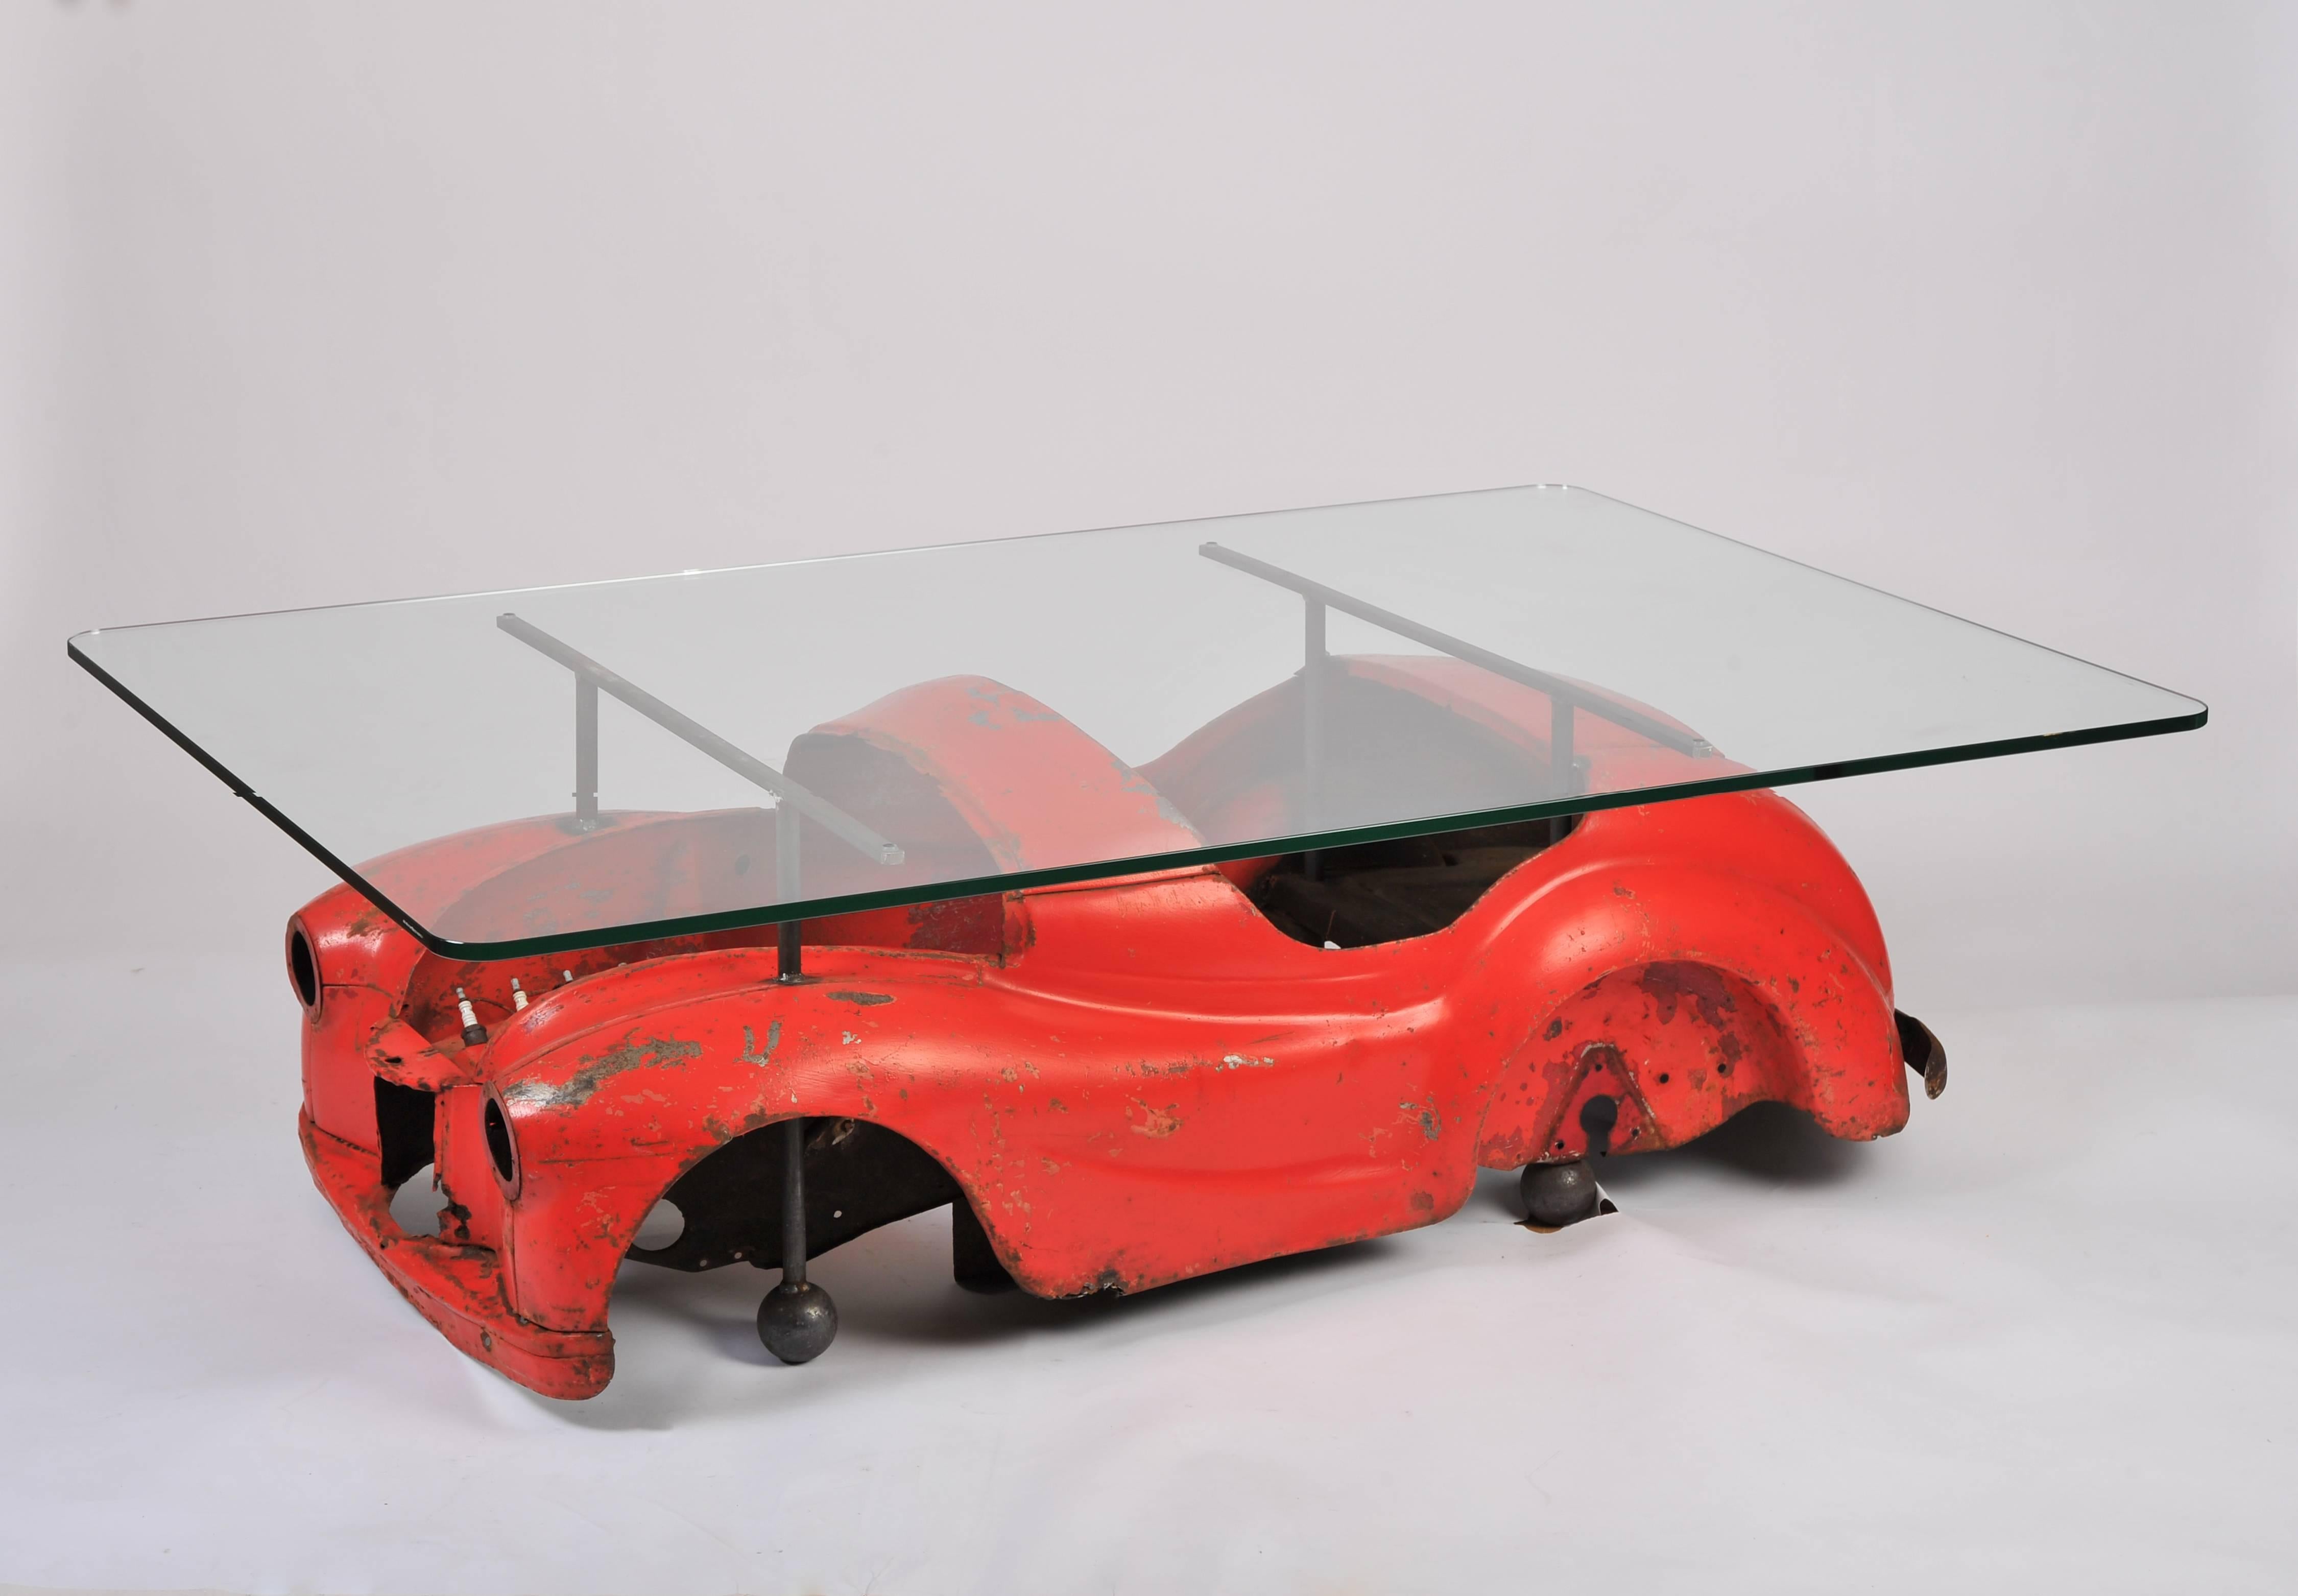 This fantastic Industrial coffee table is designed with a distressed 1950s red toy car mounted underneath a substantial glass top. The top is rectangular in shape with rounded corners. It measures 65 in - 165 cm wide, 43 1/4 in - 110 cm deep and 20